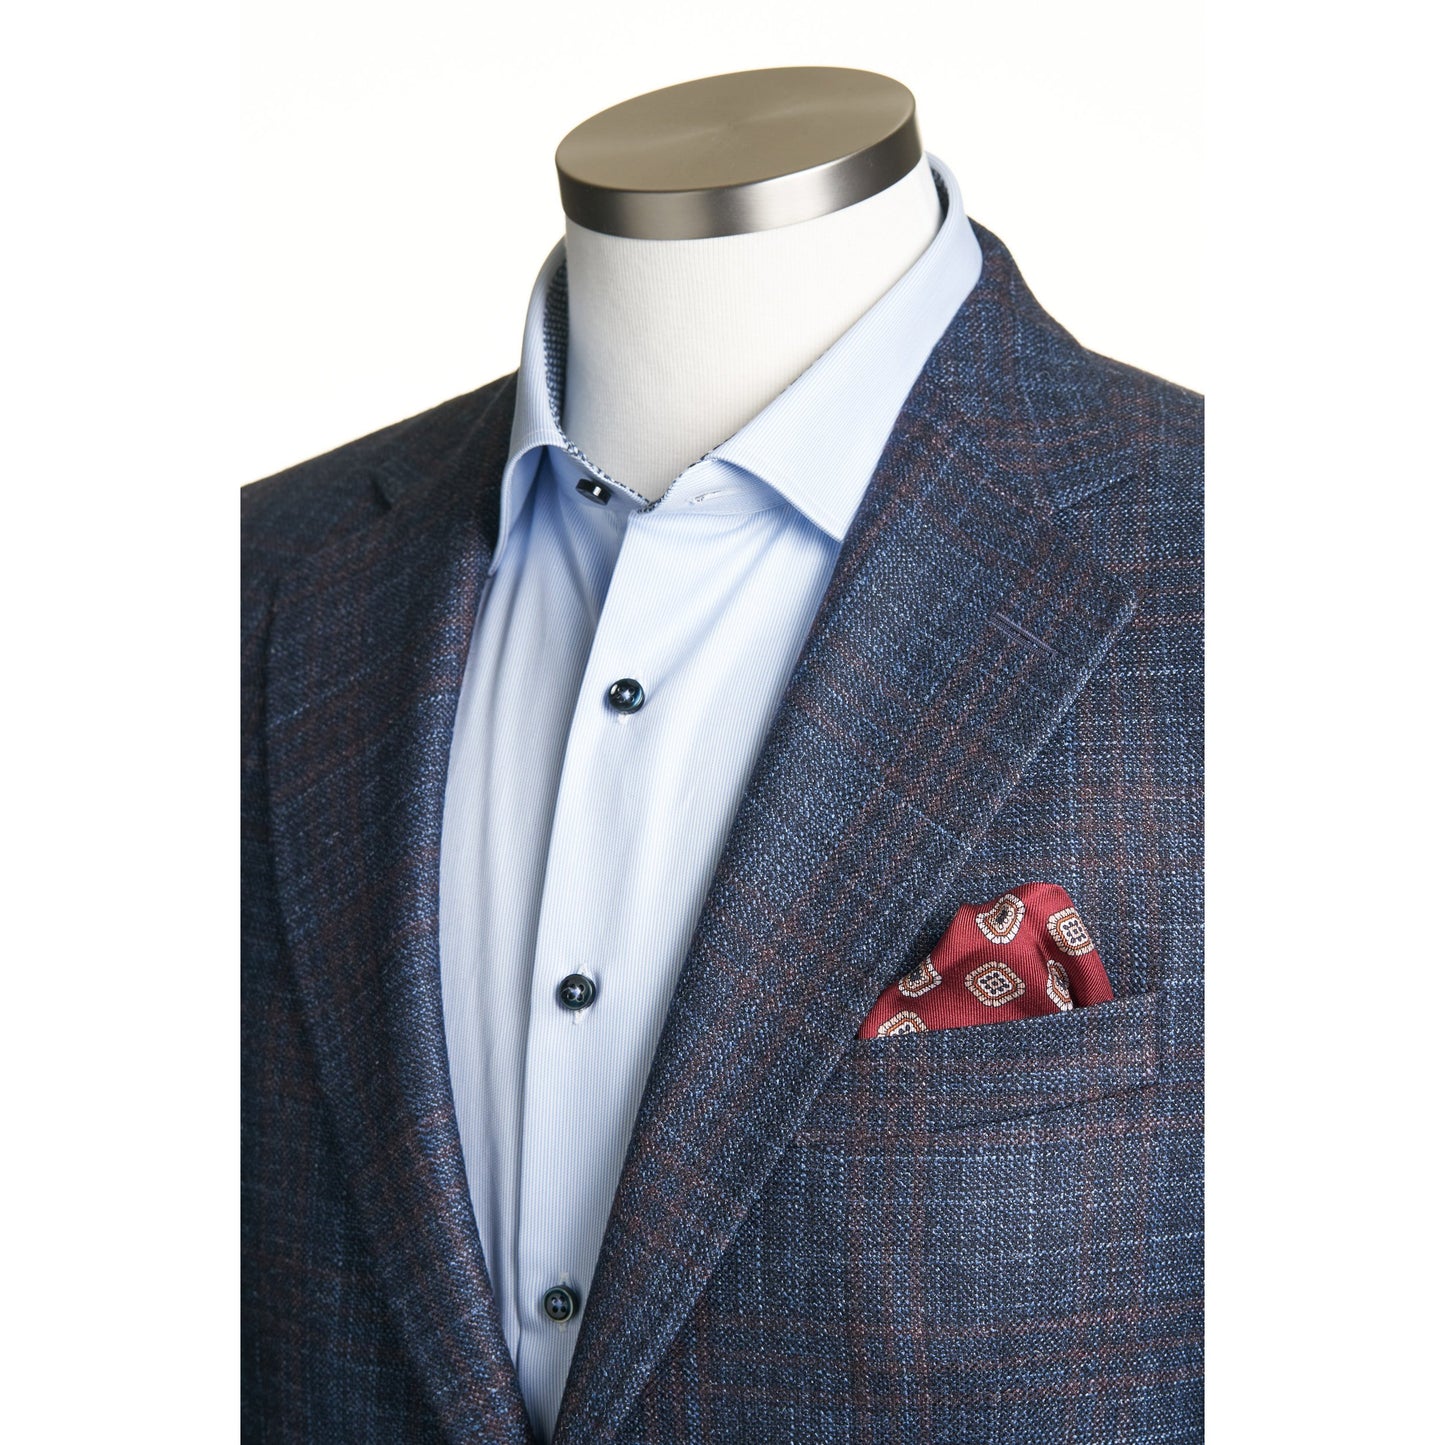 Uomo Sport Coat in Wool & Cashmere in Mid Blue & Light Maroon Plaid